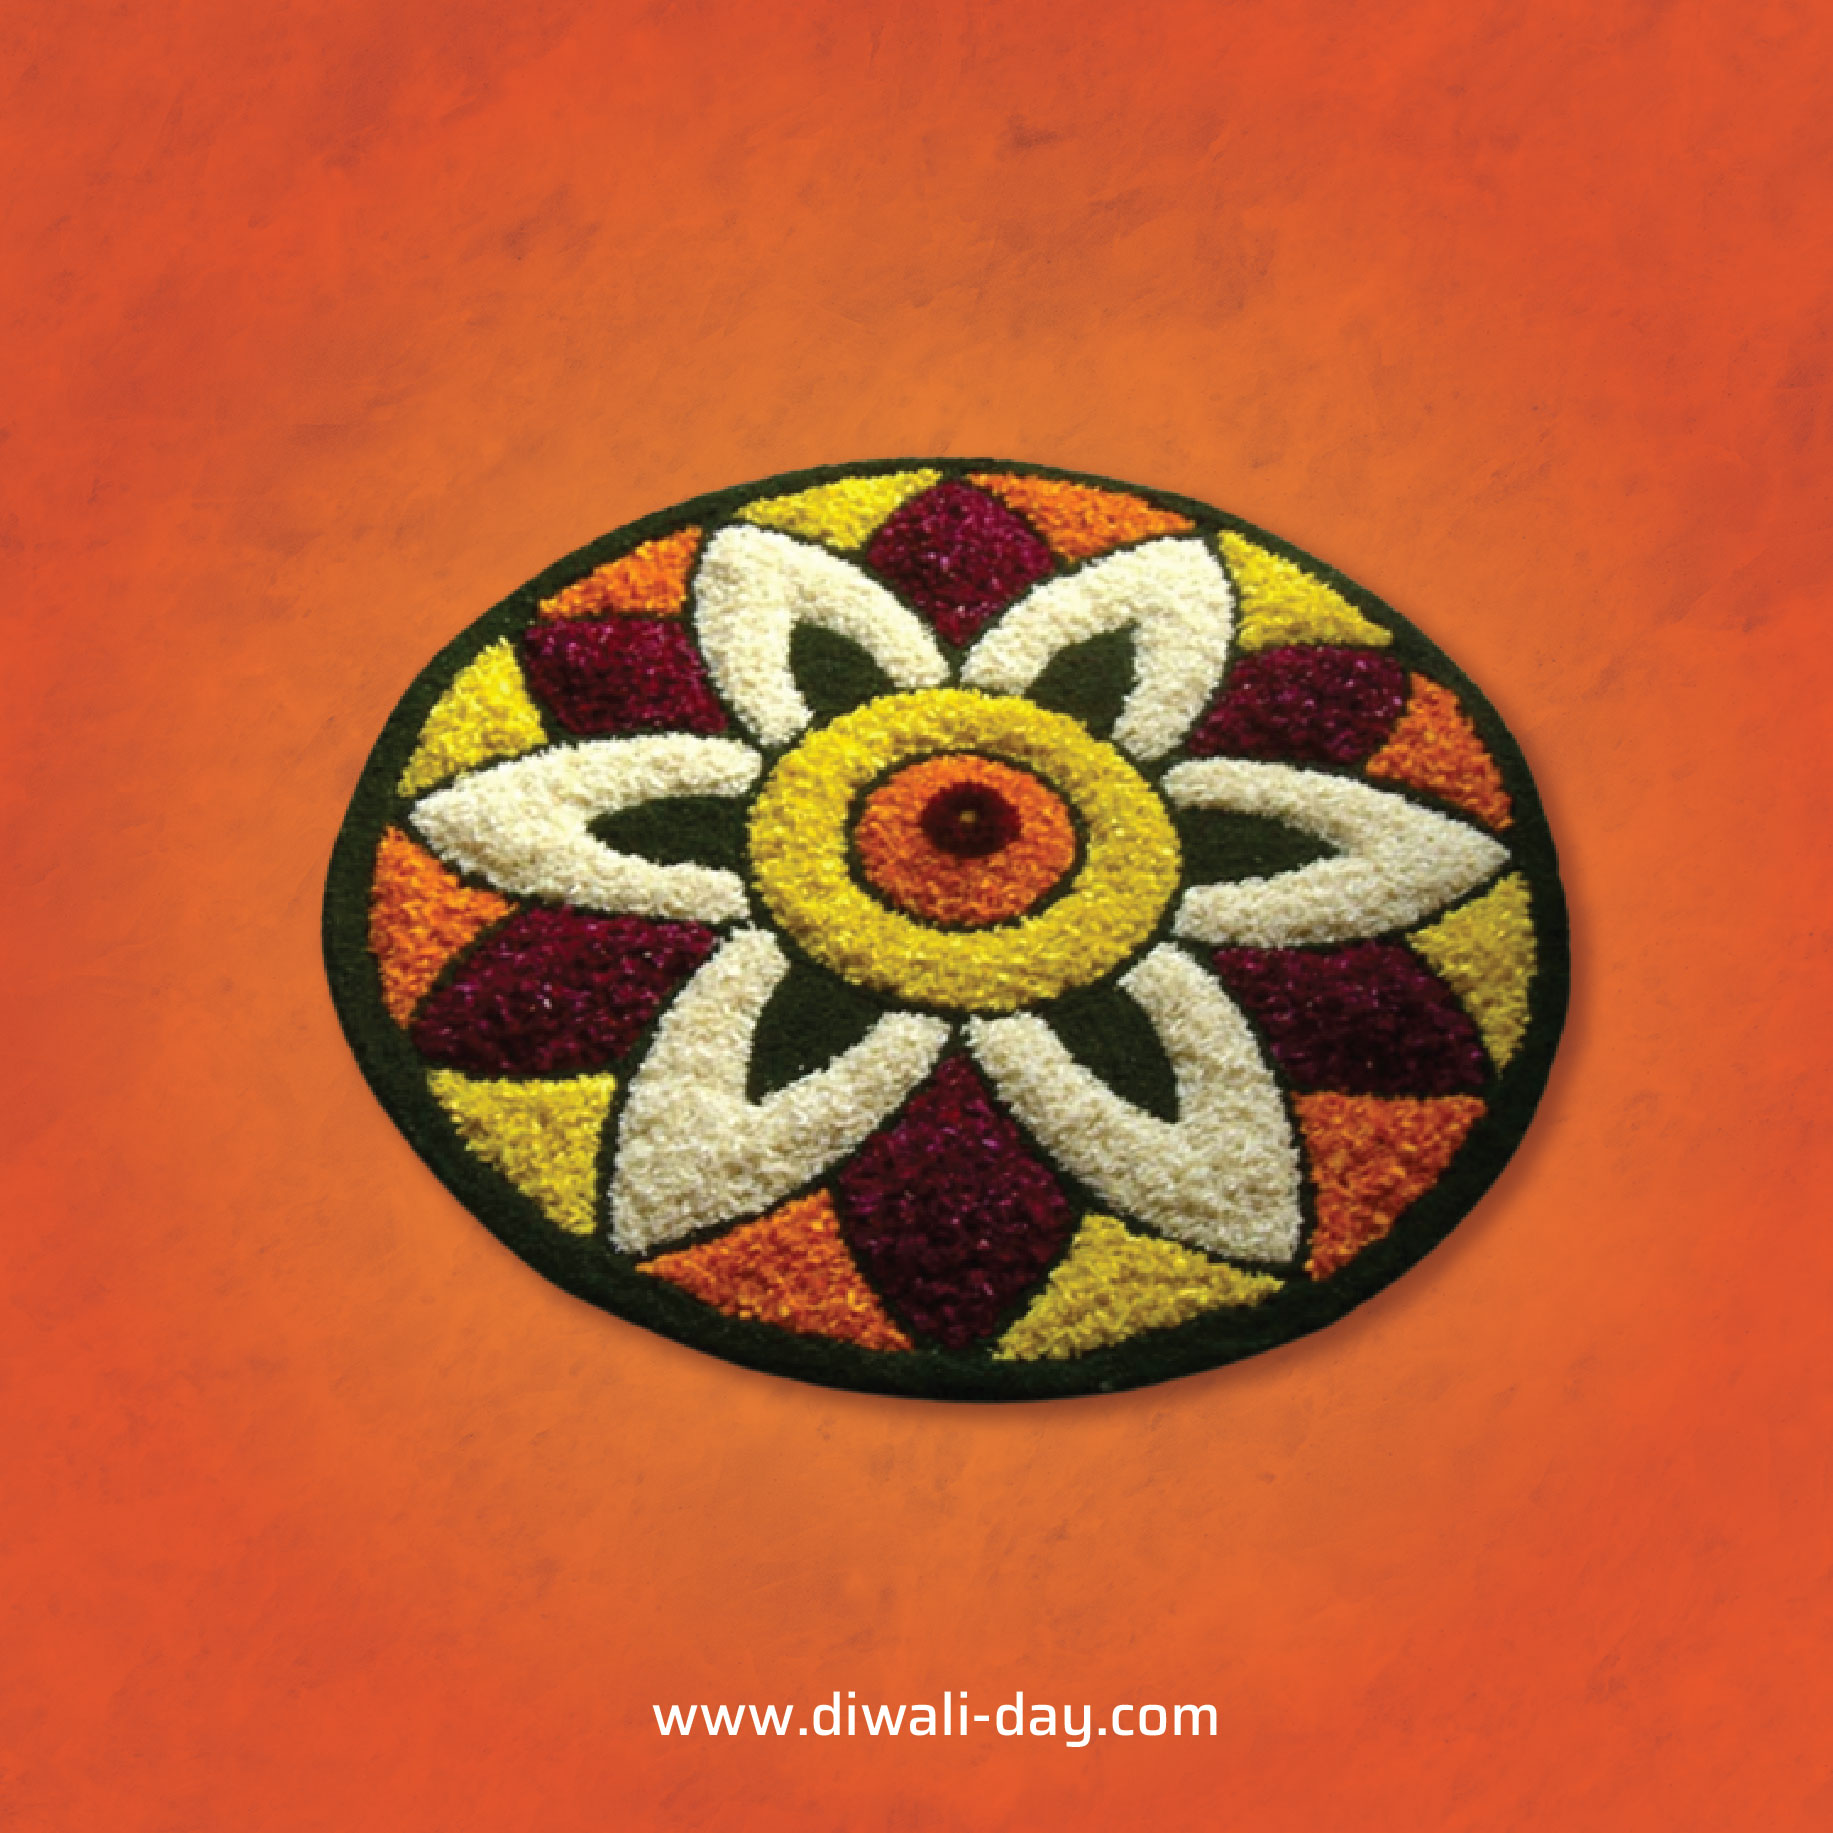 Happy Diwali 2022 Image With Wishes, Quotes & Messages